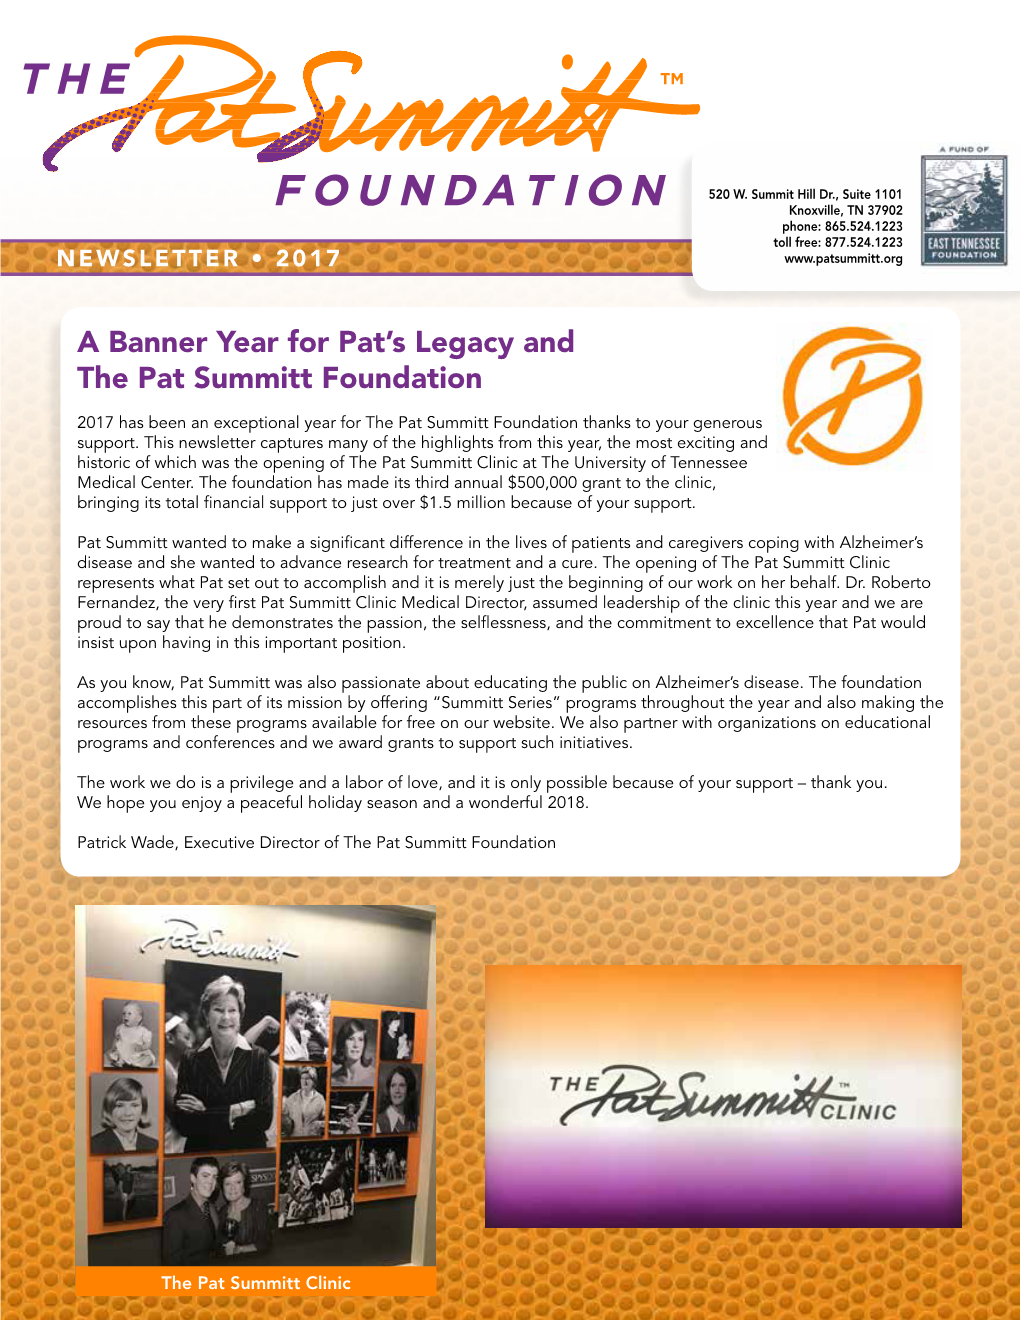 A Banner Year for Pat's Legacy and the Pat Summitt Foundation